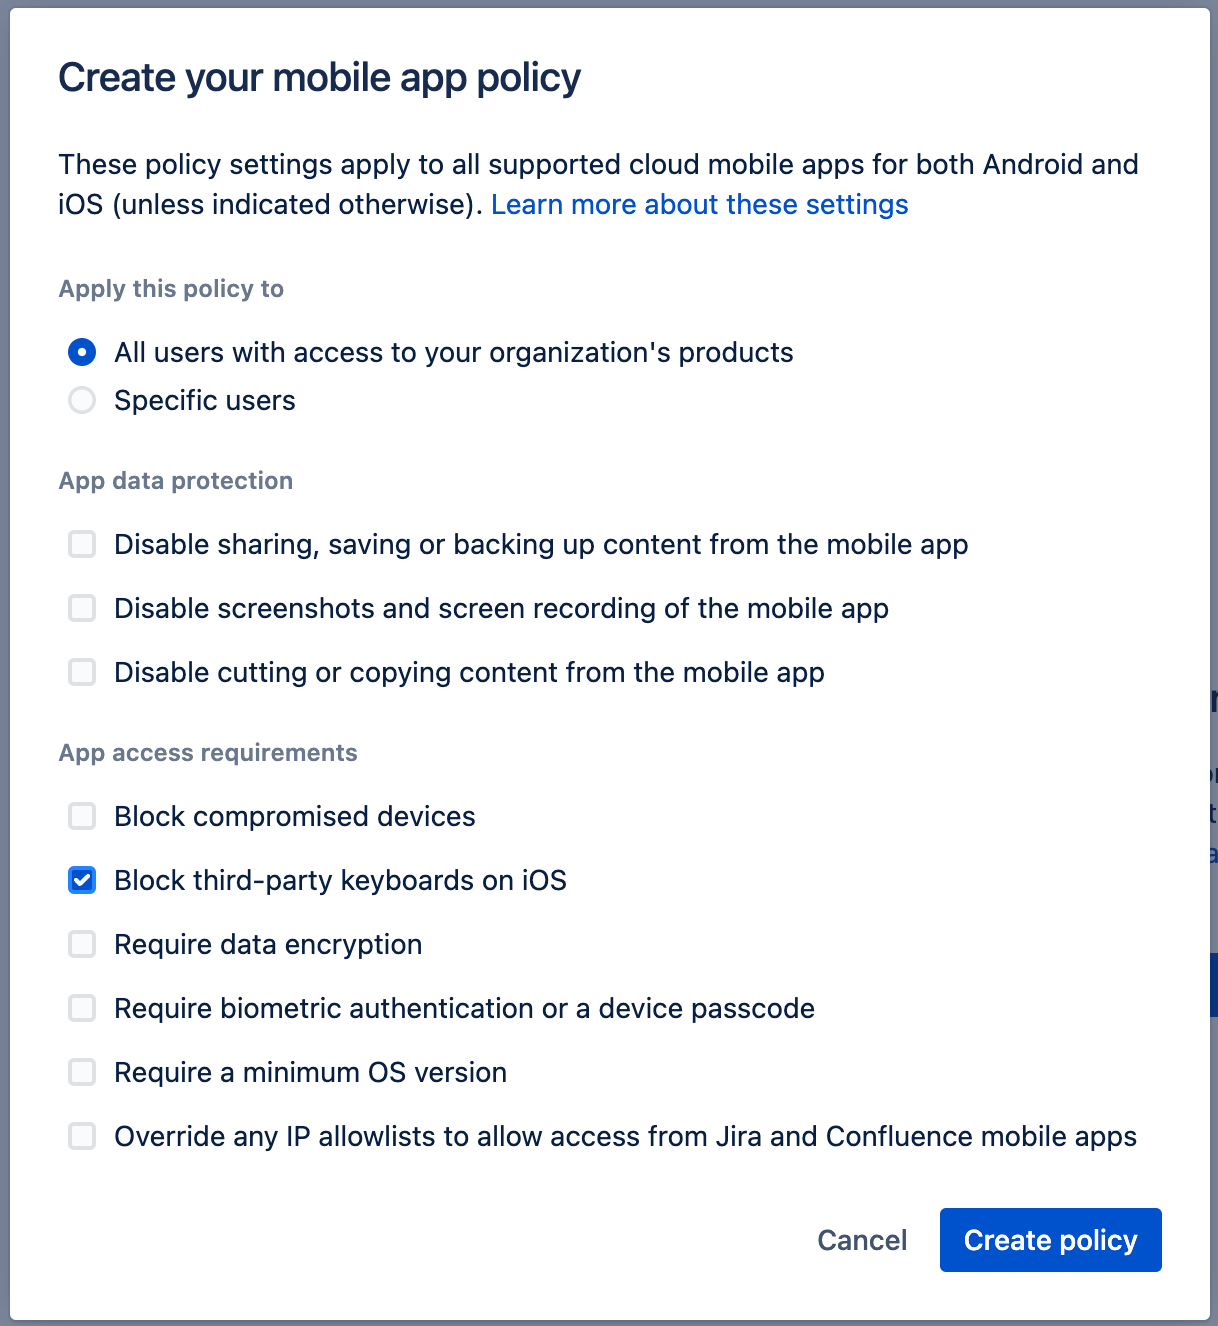 Shows and describes mobile app security settings